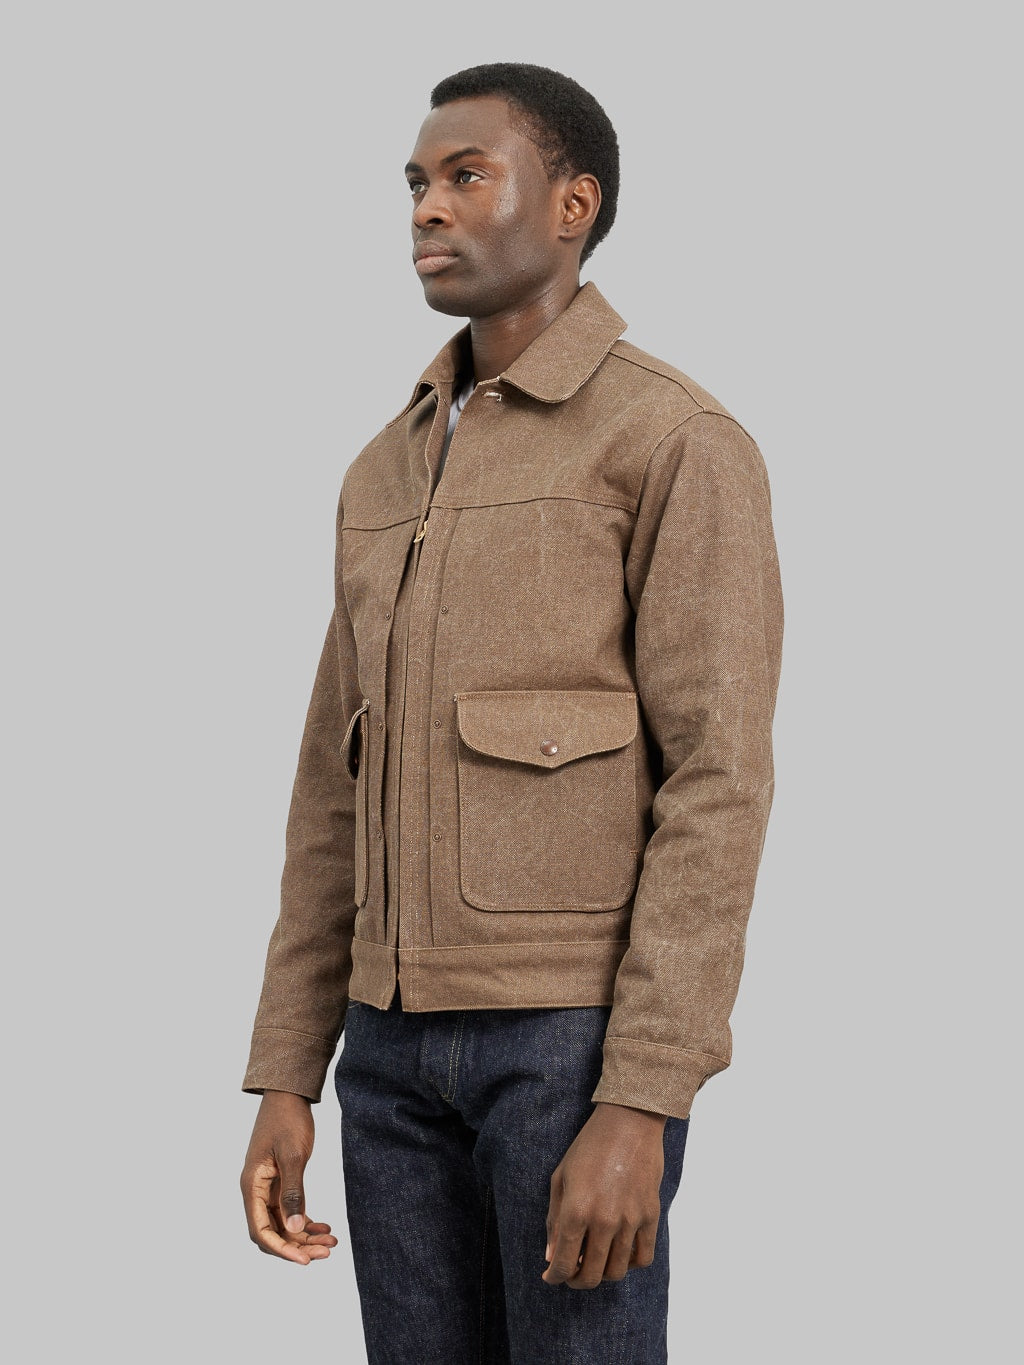 Freenote Cloth CD 4 Jacket Brown  model side fit